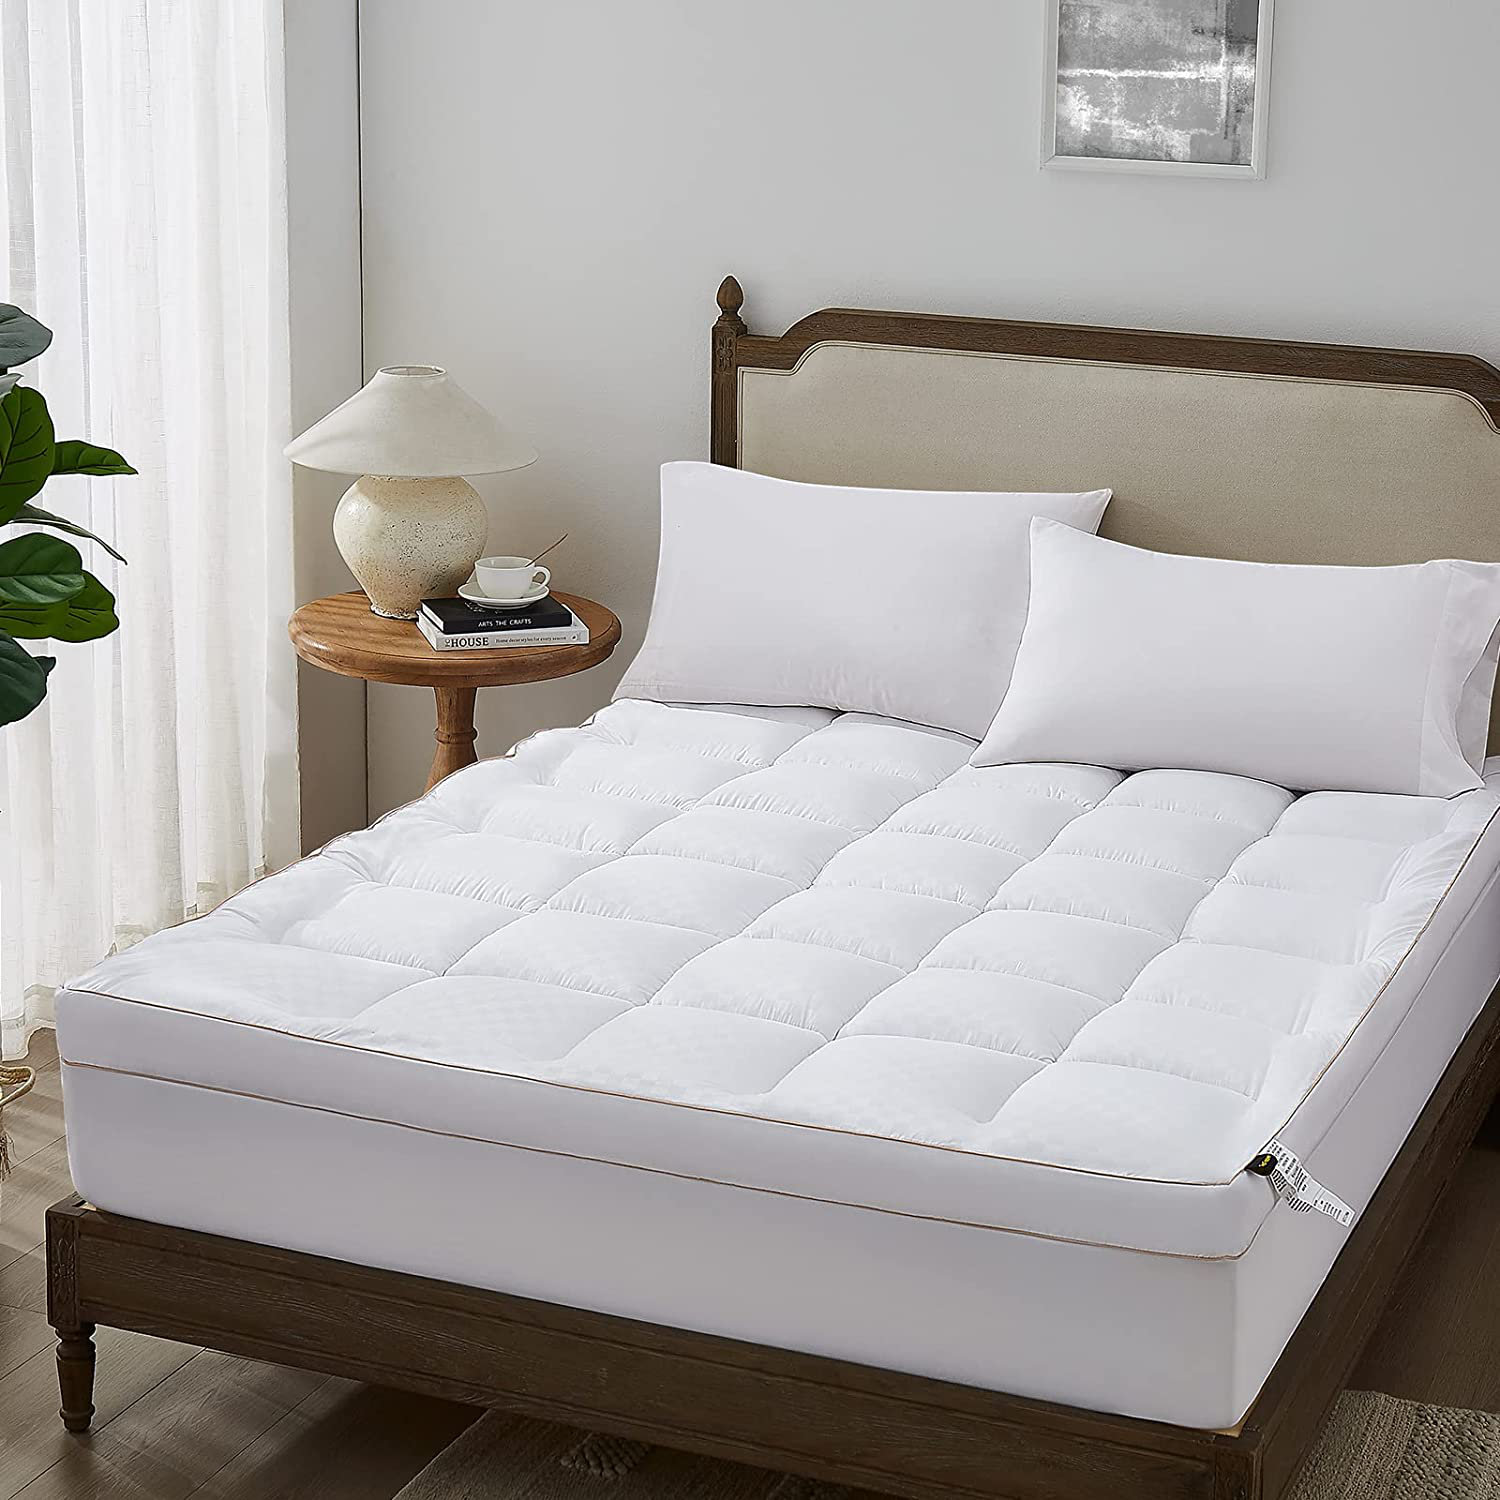 2 inch Bamboo-Filled Cotton Mattress Topper by Royal Hotel™ - King 